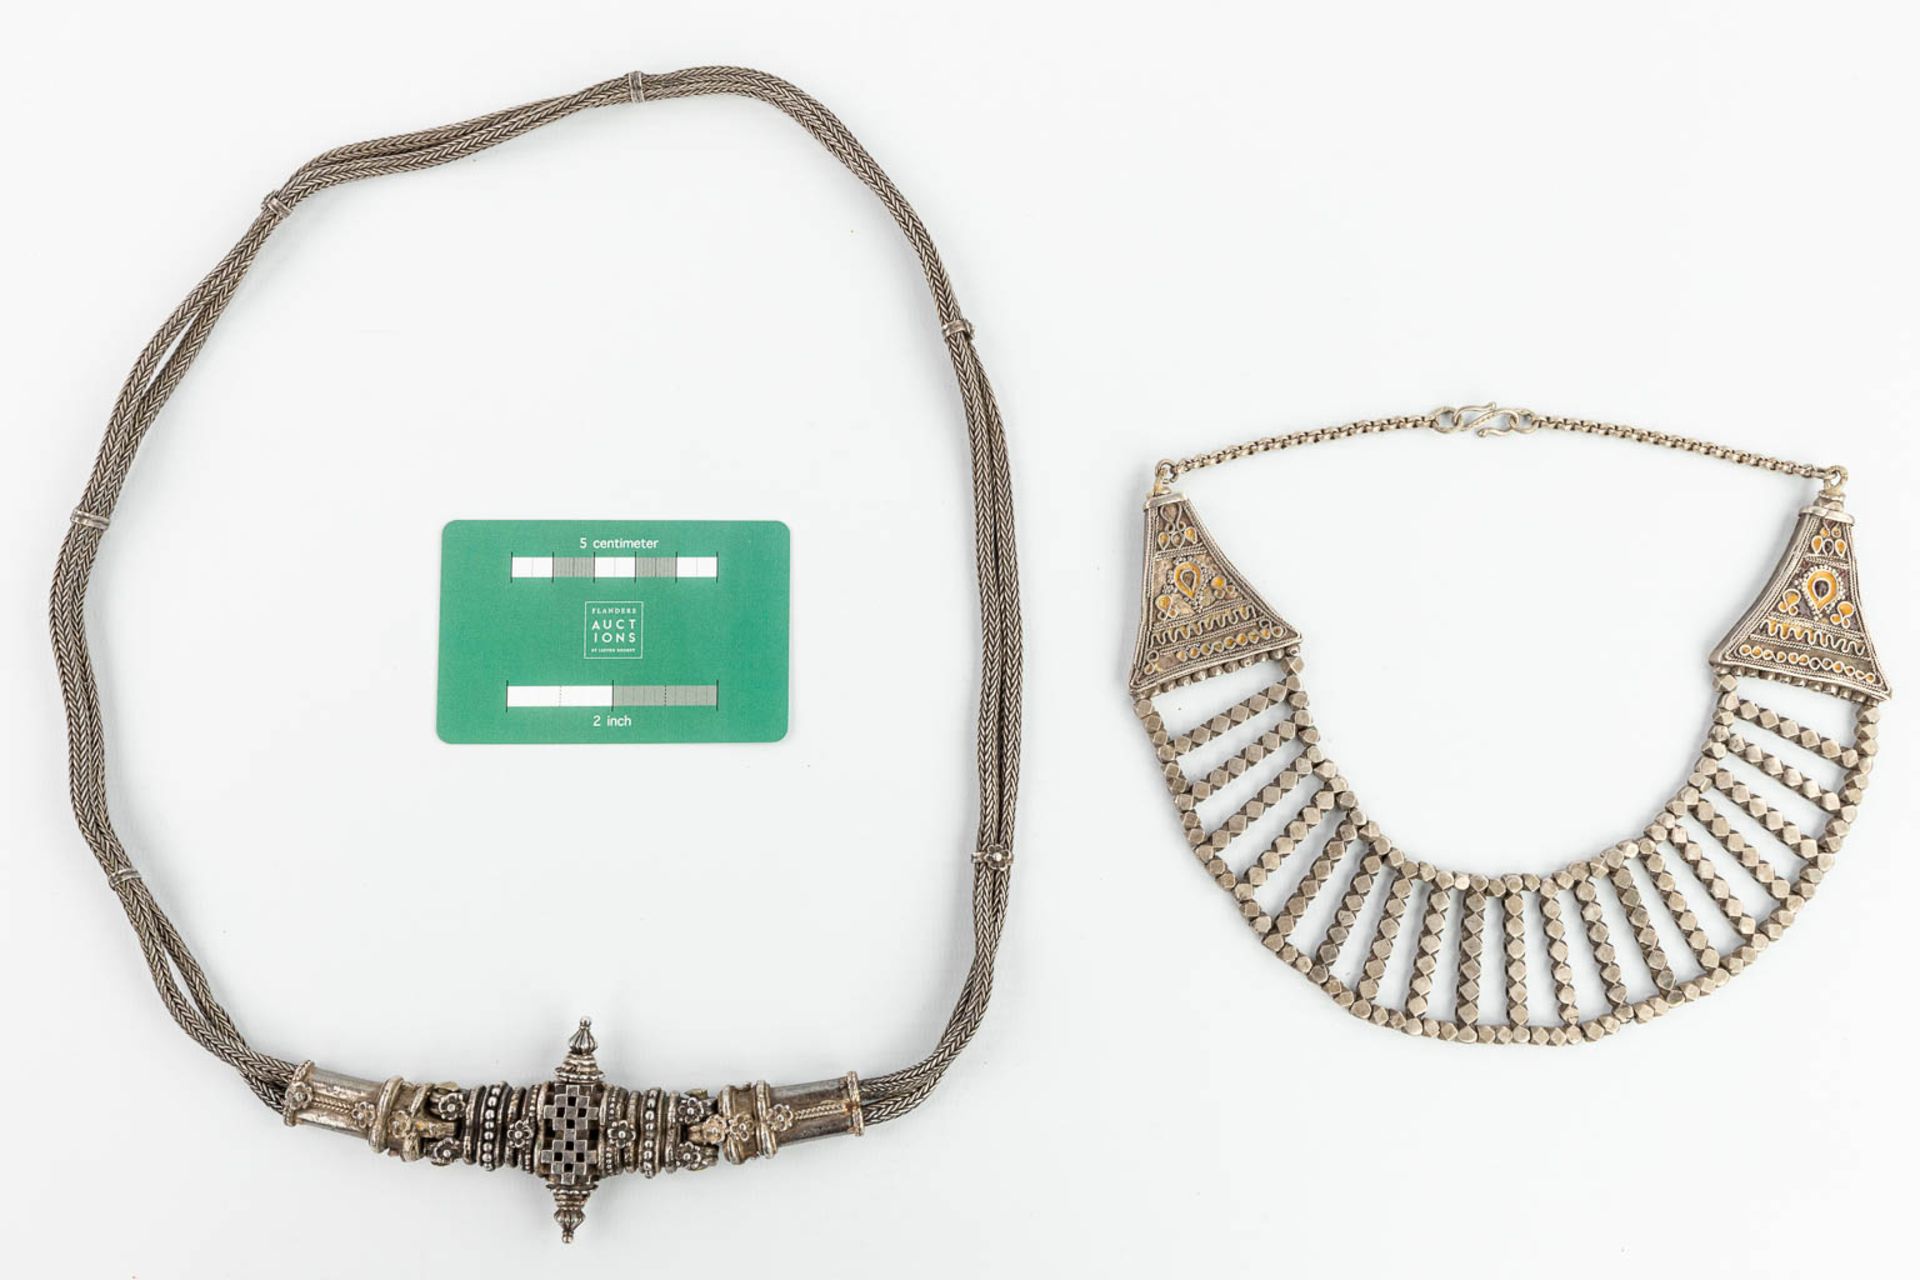 A necklace and belt made of silver in Oriental style. - Image 9 of 14